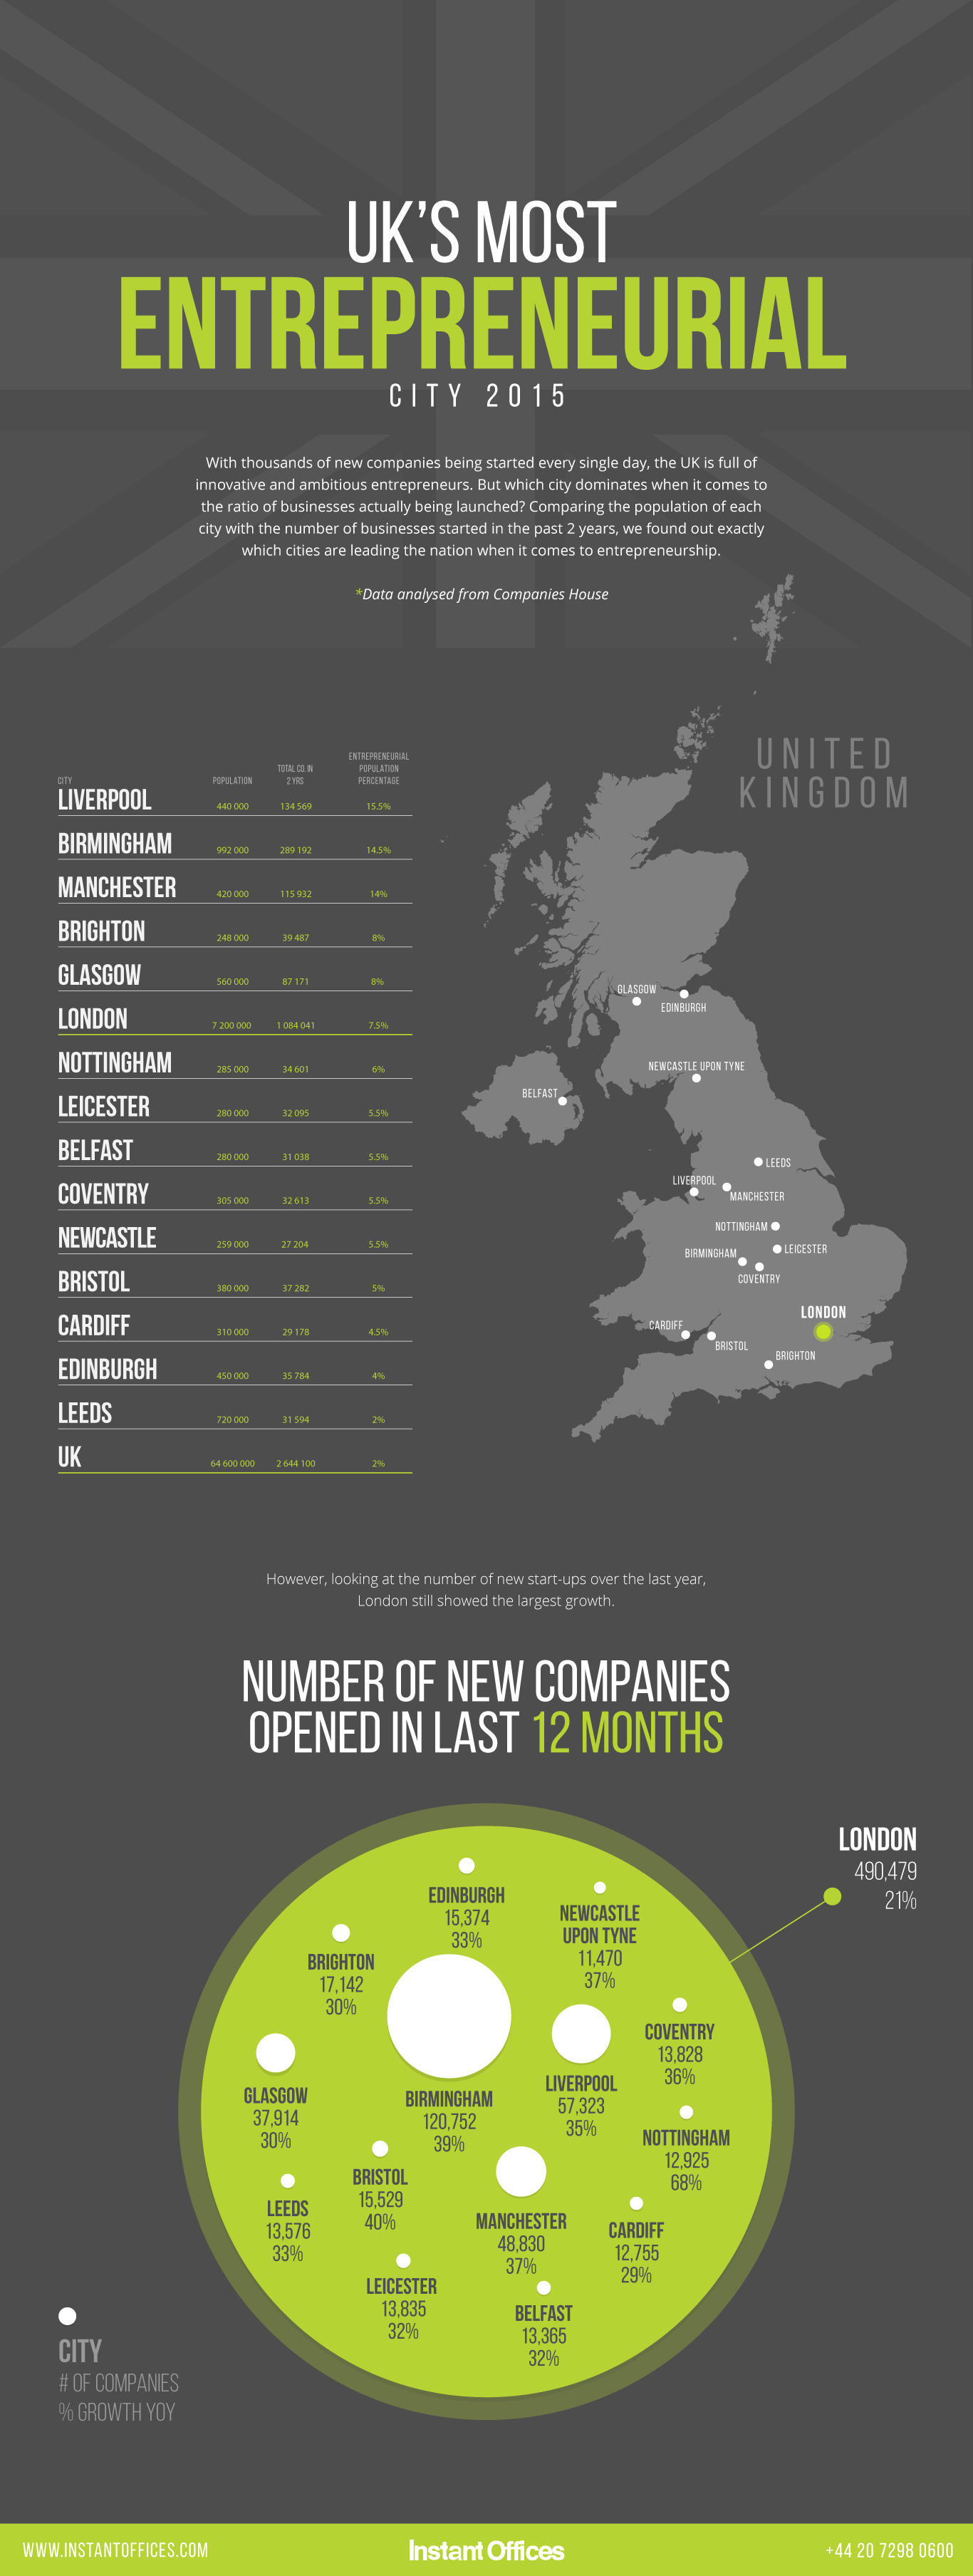 Where was the UK’s Most Entrepreneurial City in 2015?